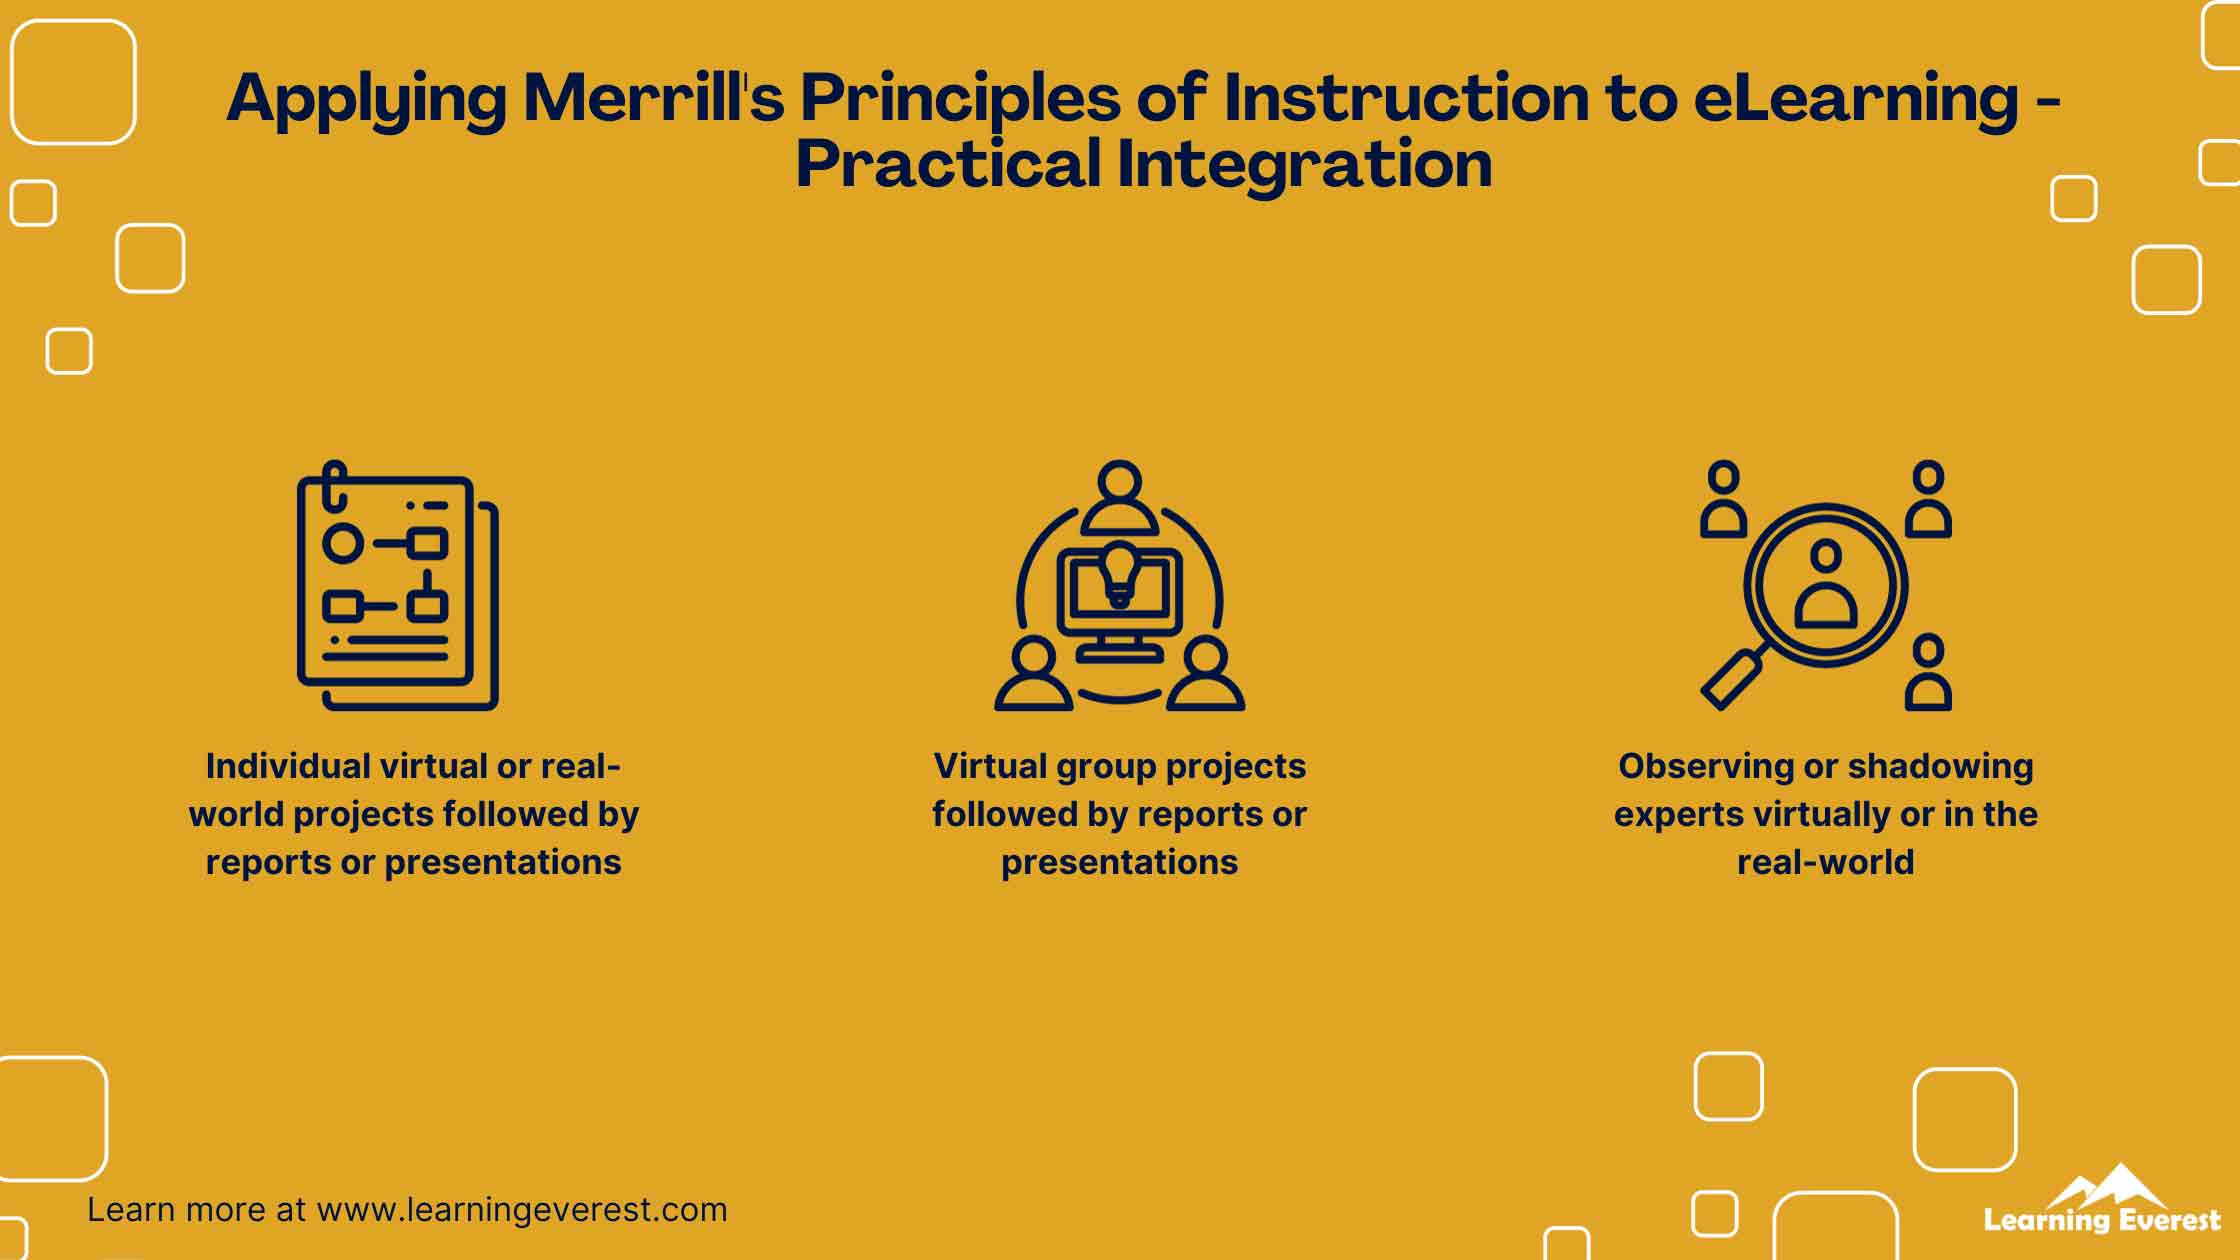 Applying Merrill's Principles of Instruction to eLearning - Practical Integration